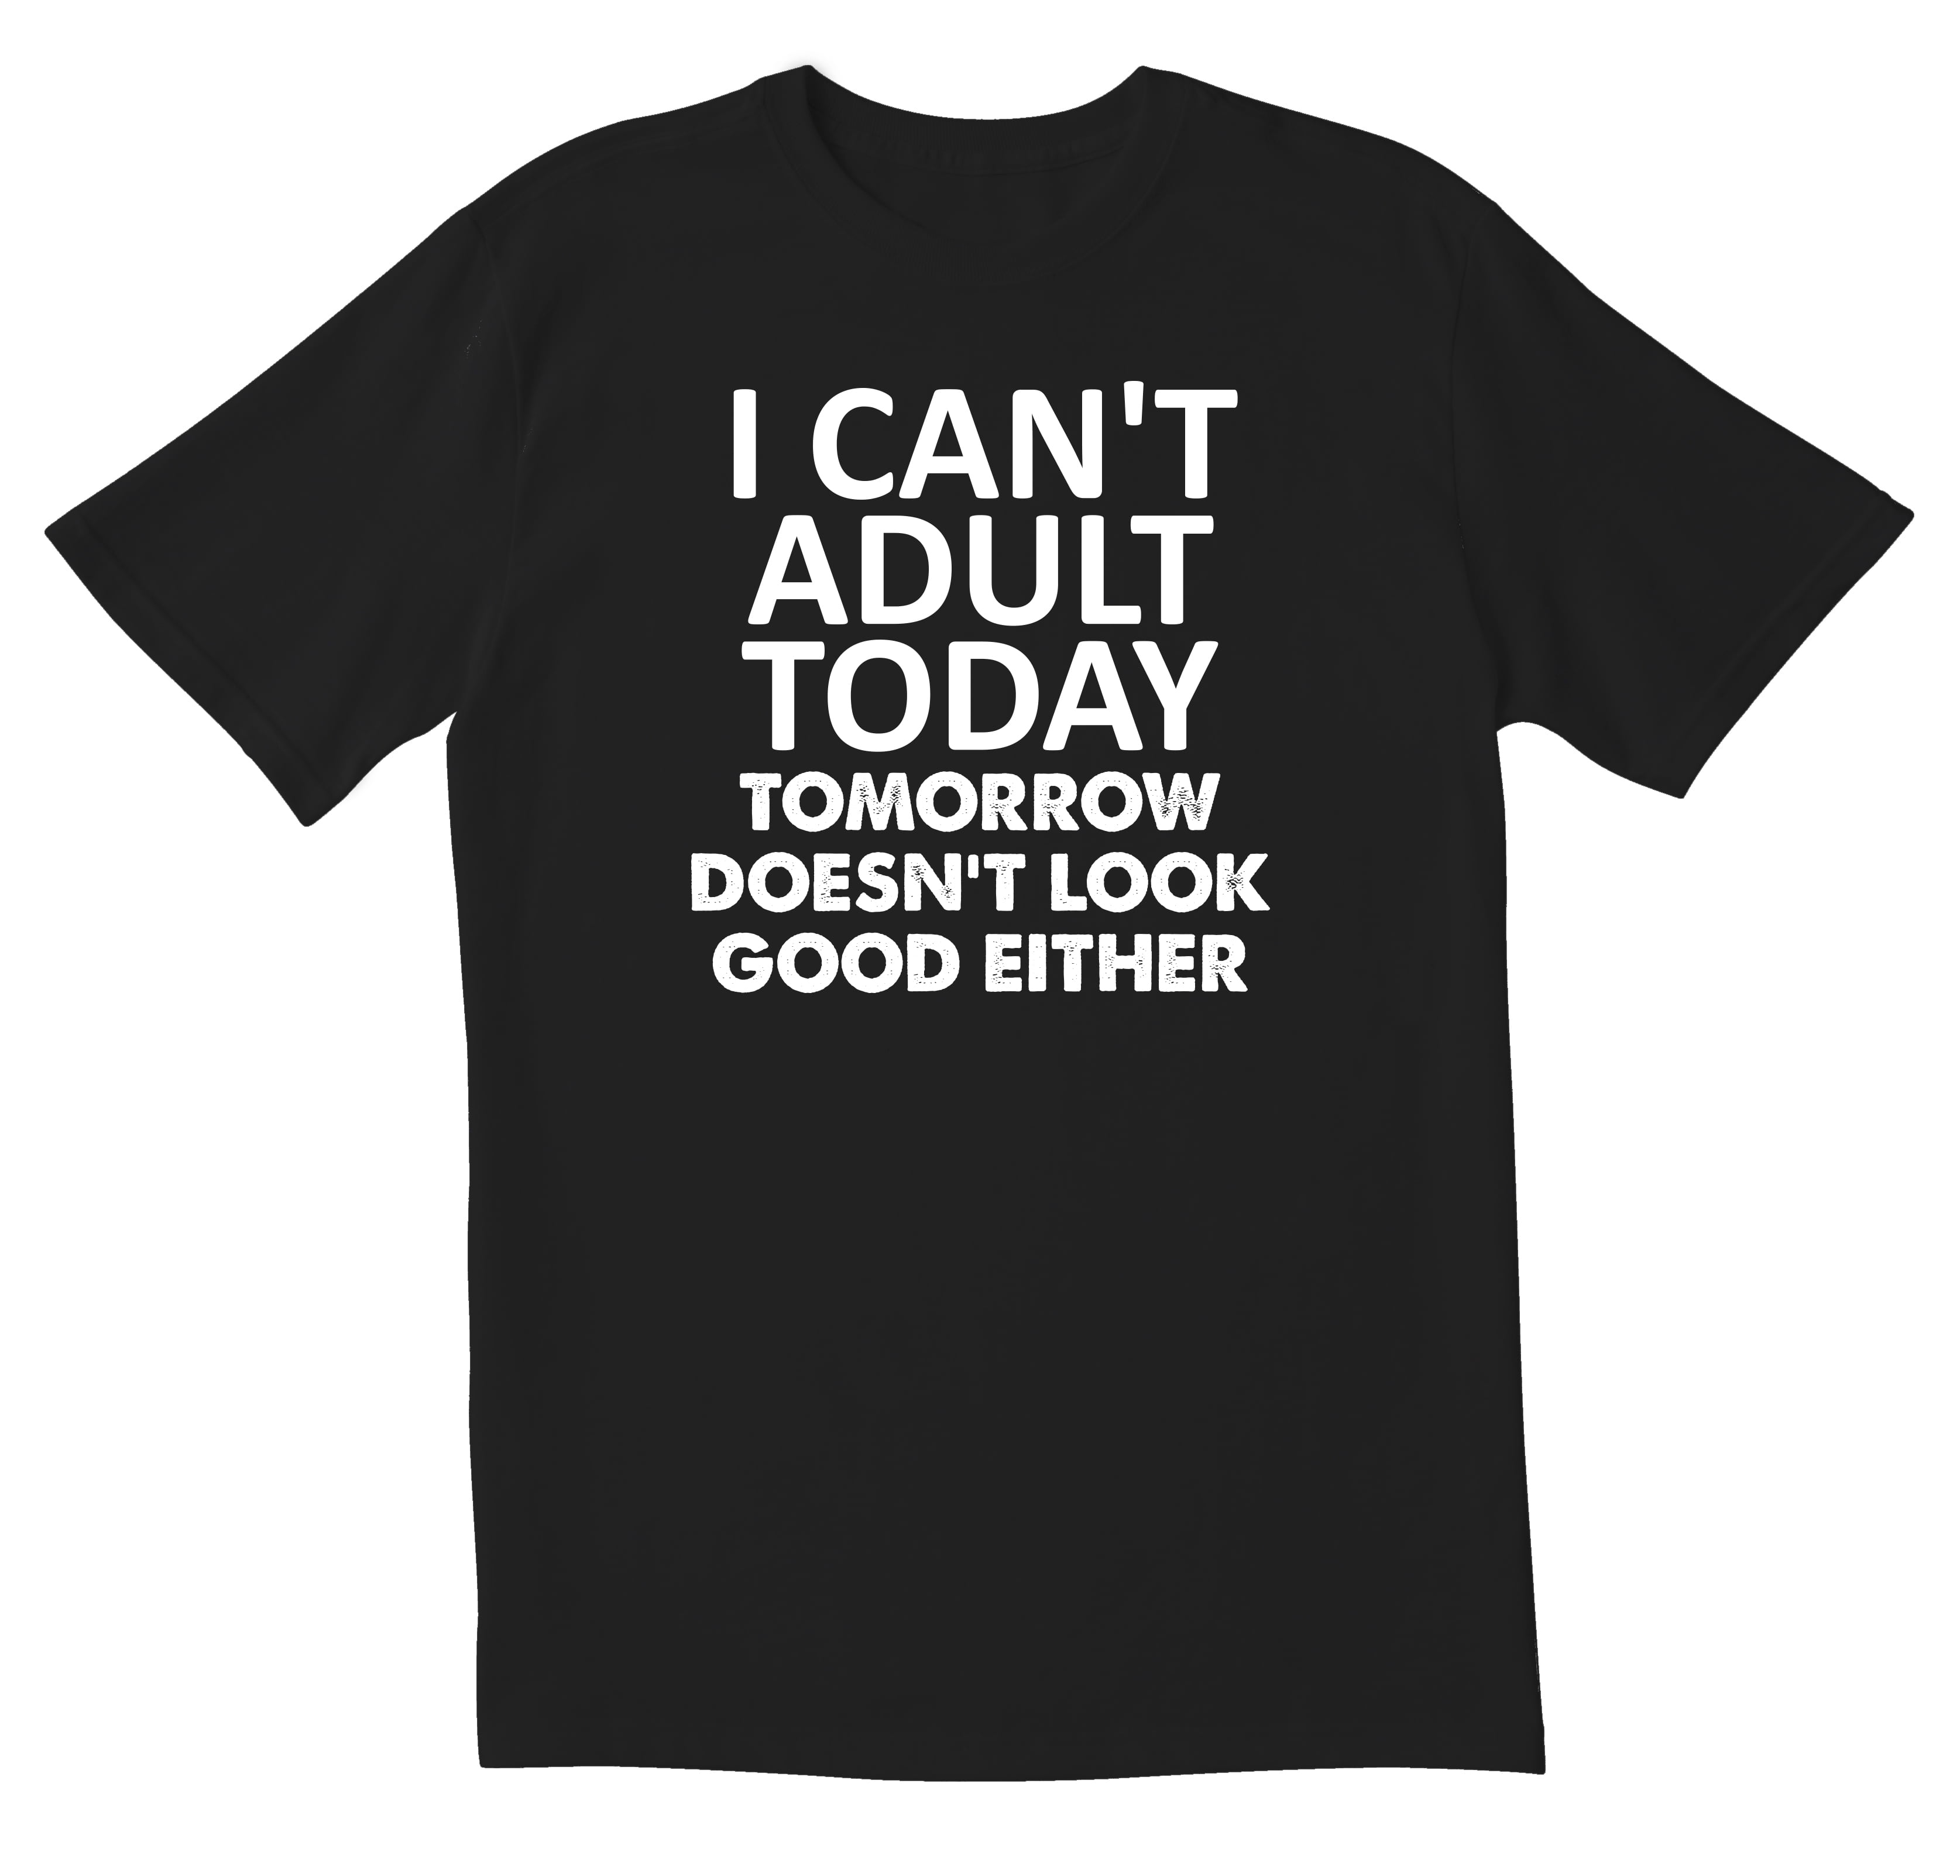 I Can't Adult Today Tomorrow's not looking good either 100% Cotton printed Gift  t-shirt.